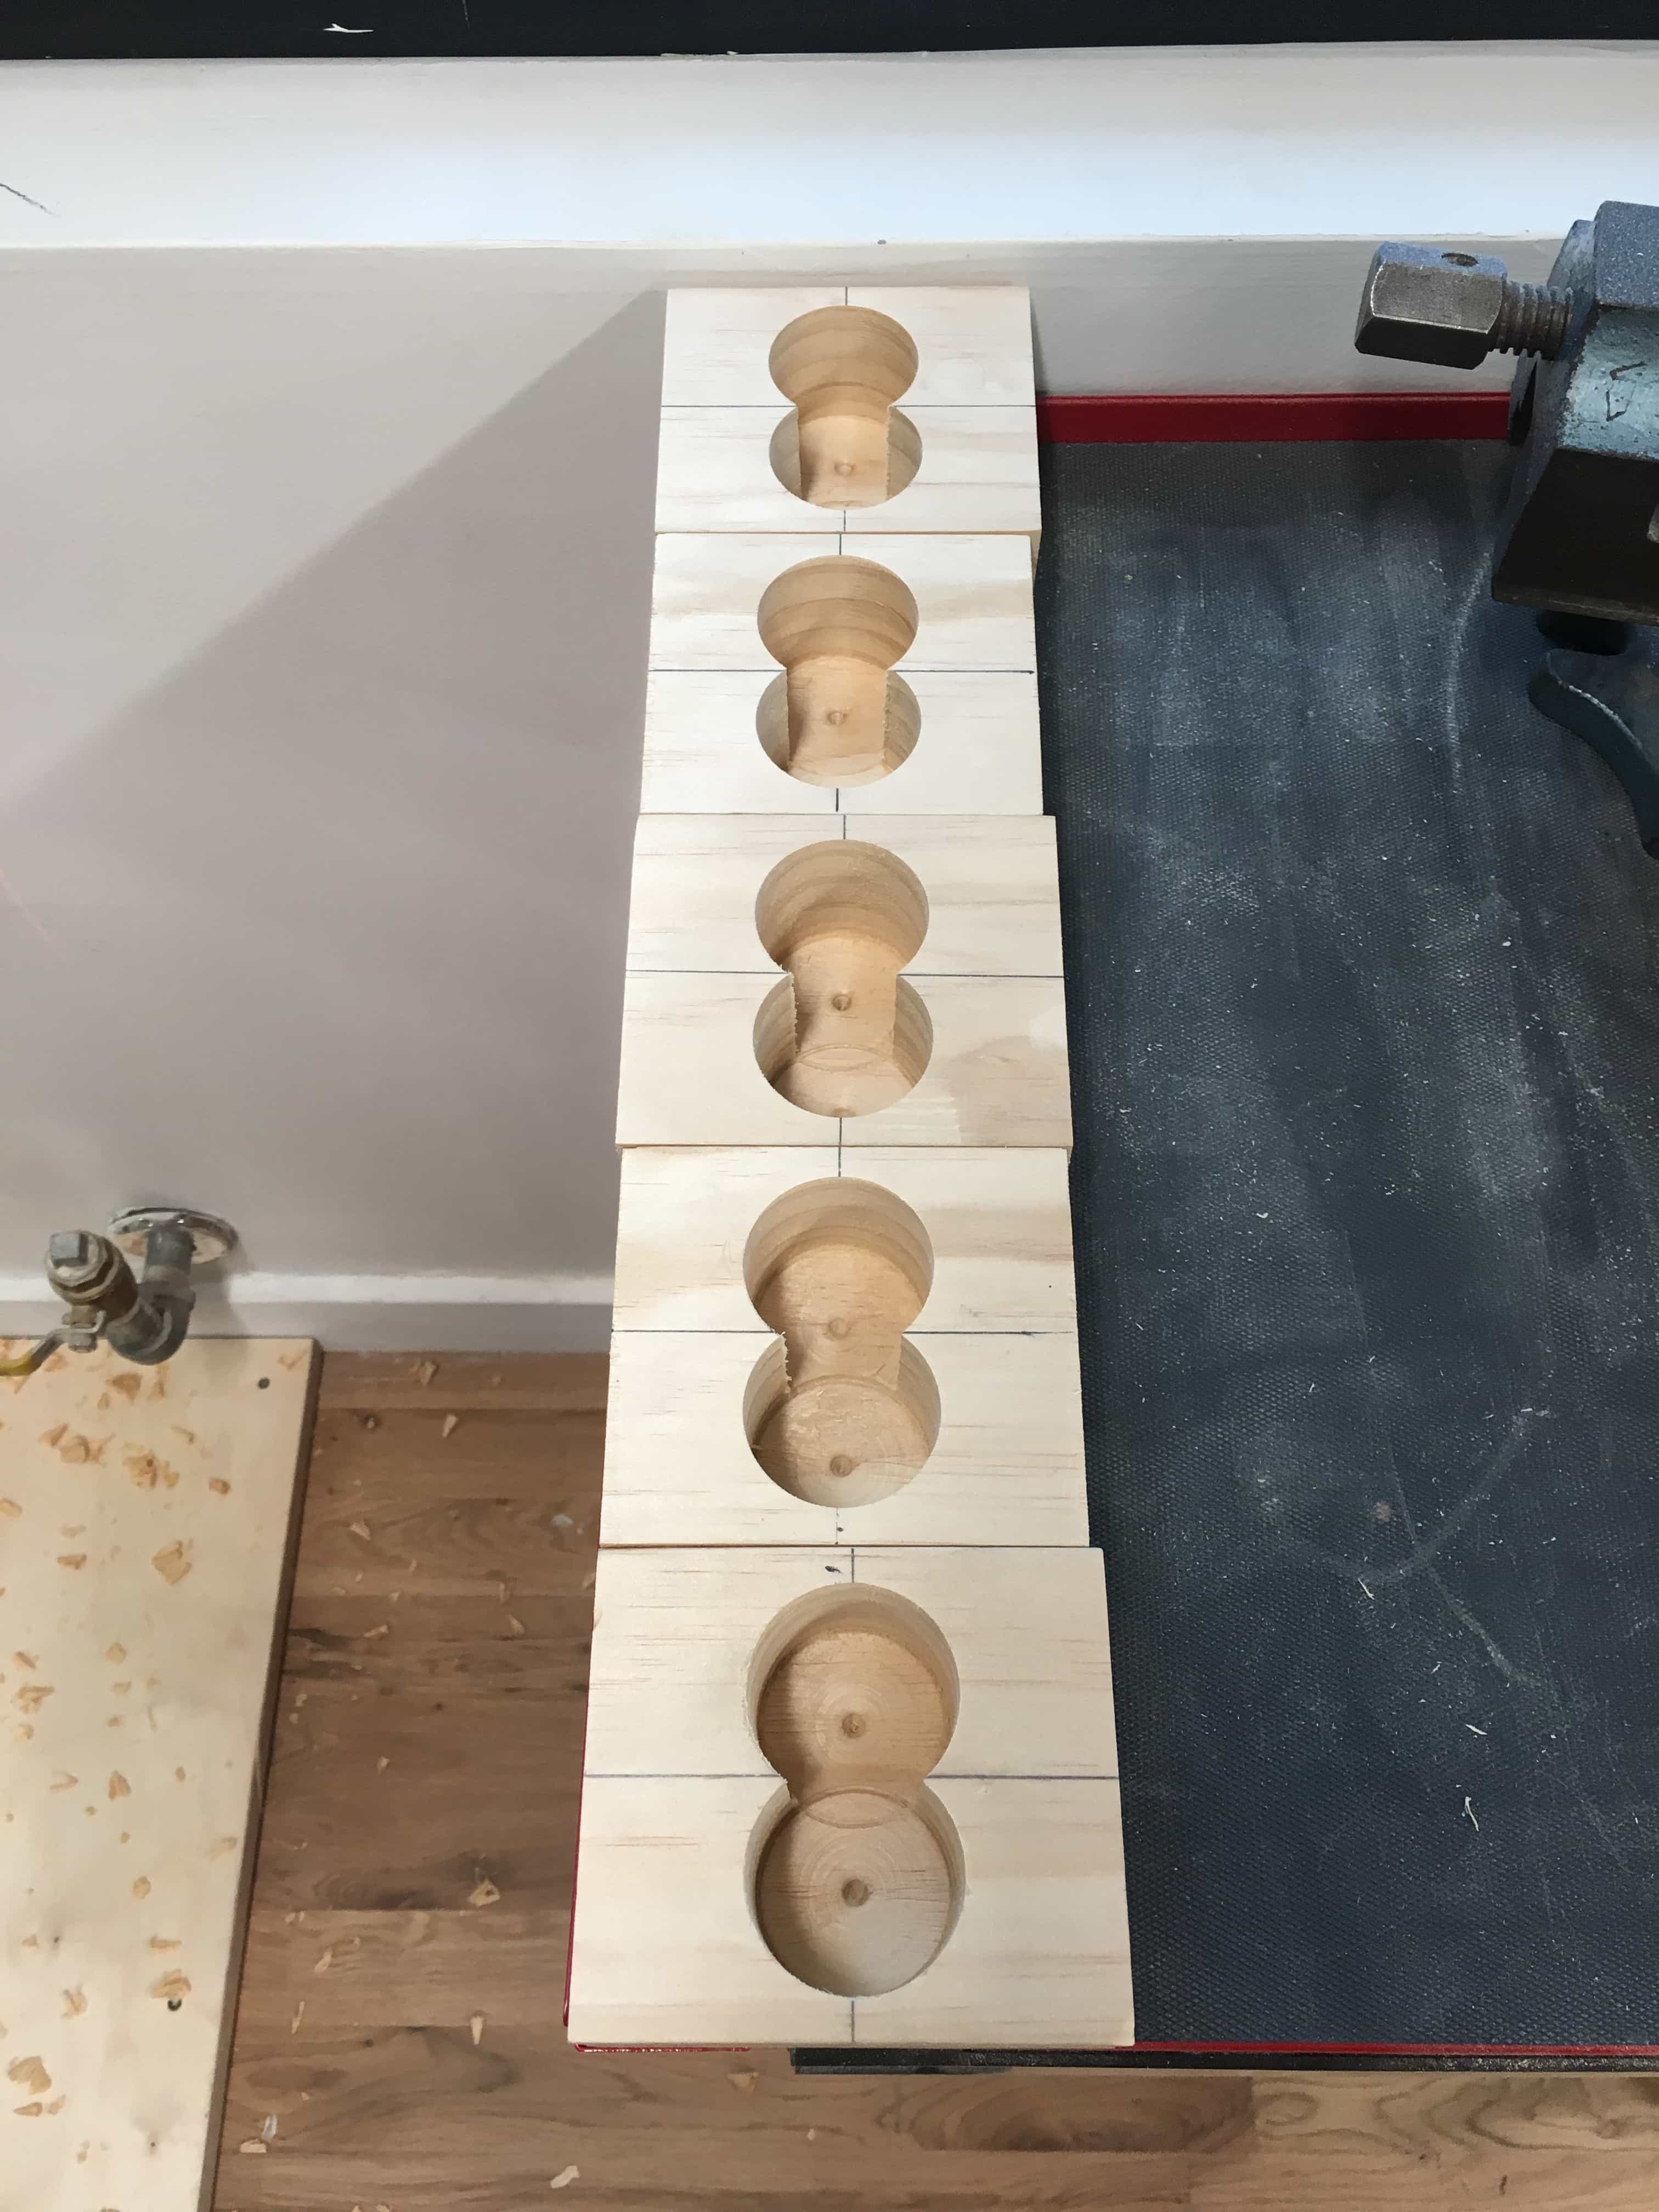 Five blocks with holes drilled into them.